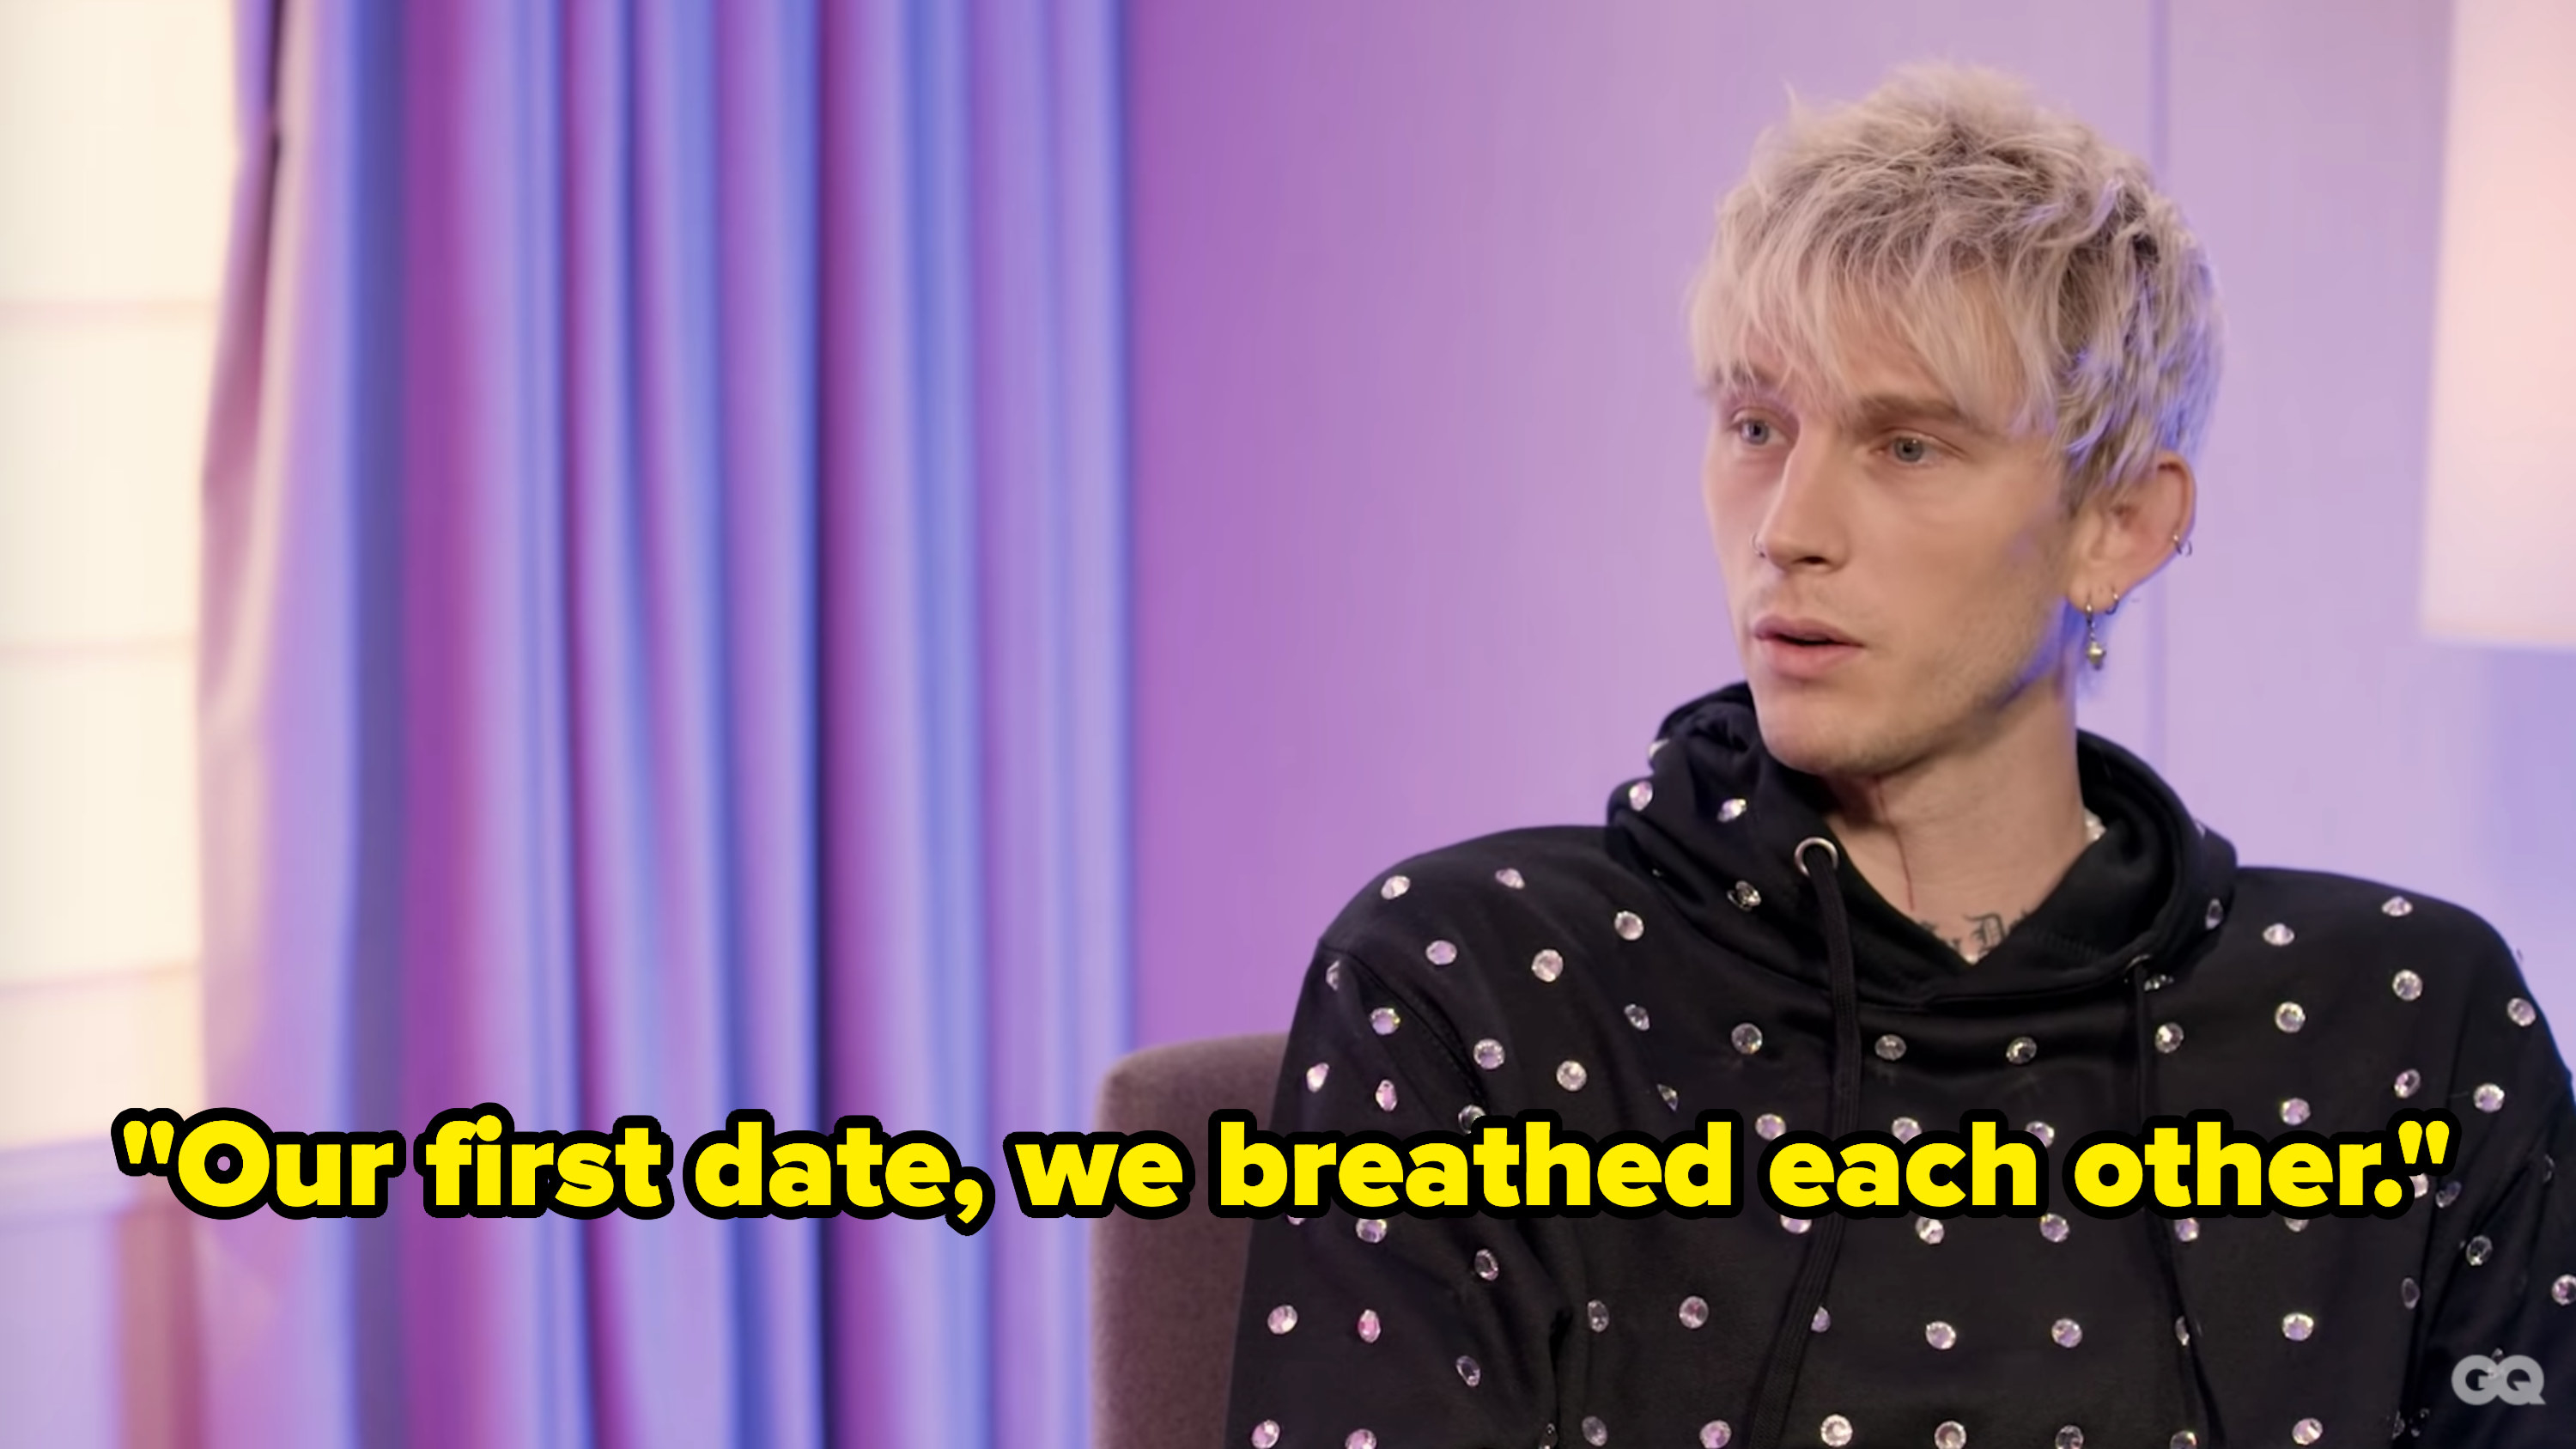 Machine Gun Kelly says &quot;Our first date, we breathed each other&quot;